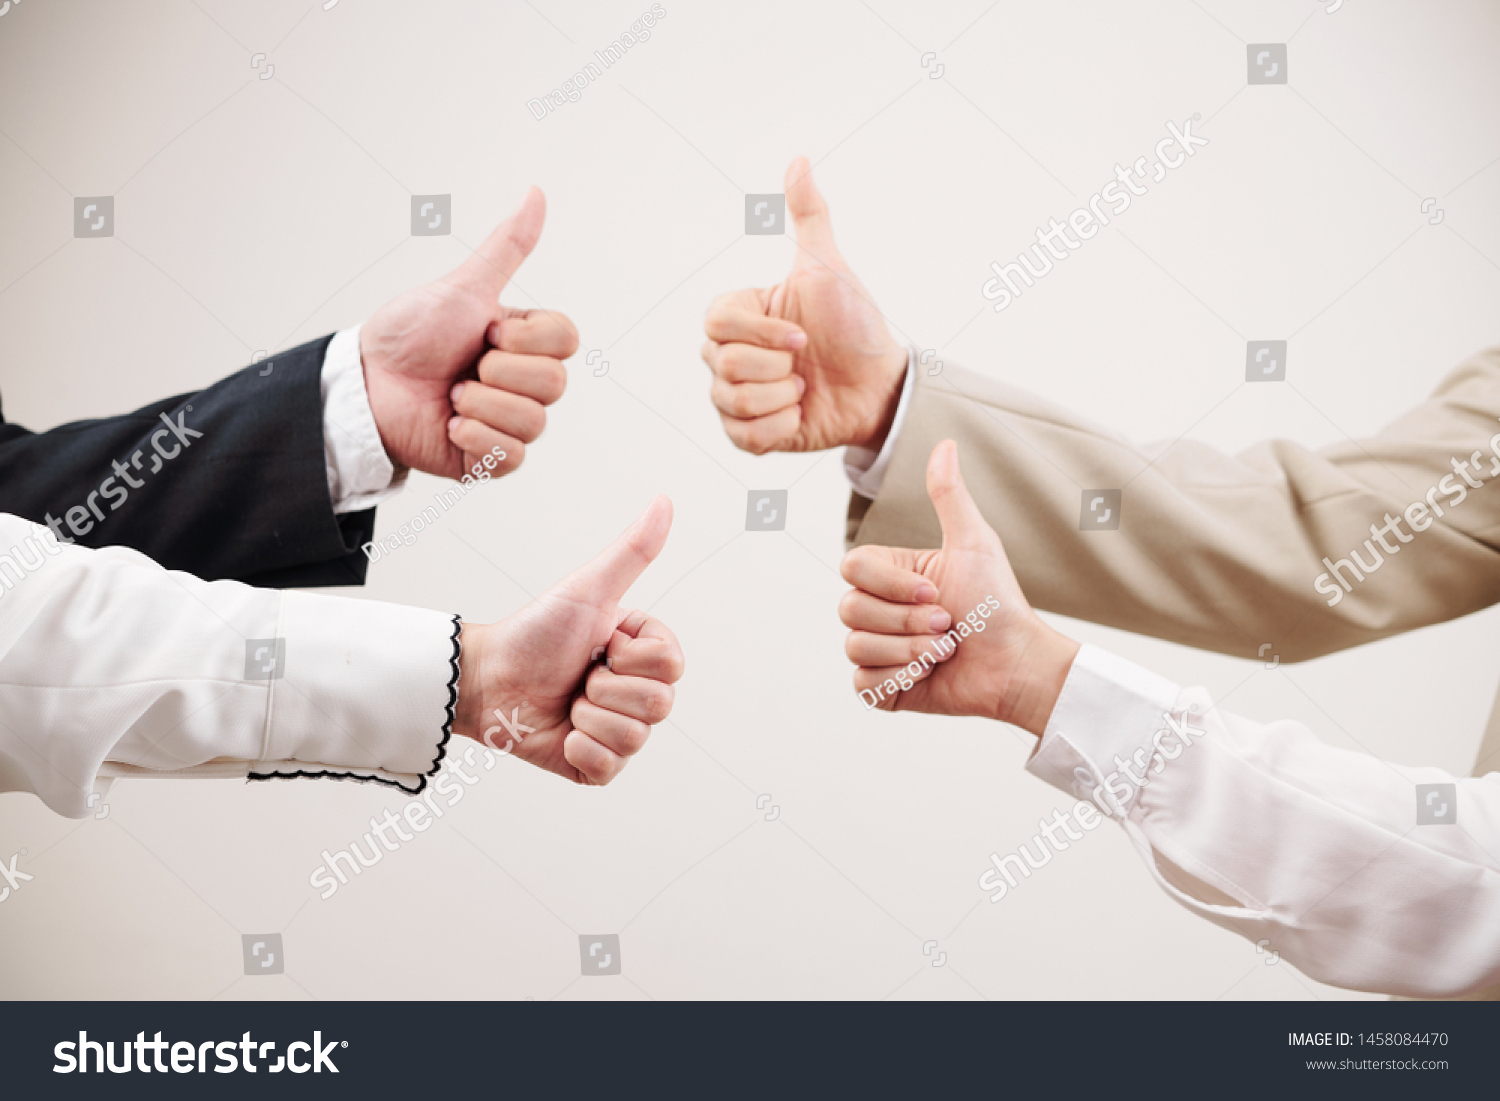 Close-up of business team showing thumbs up and symbolize success in business against the white background #1458084470